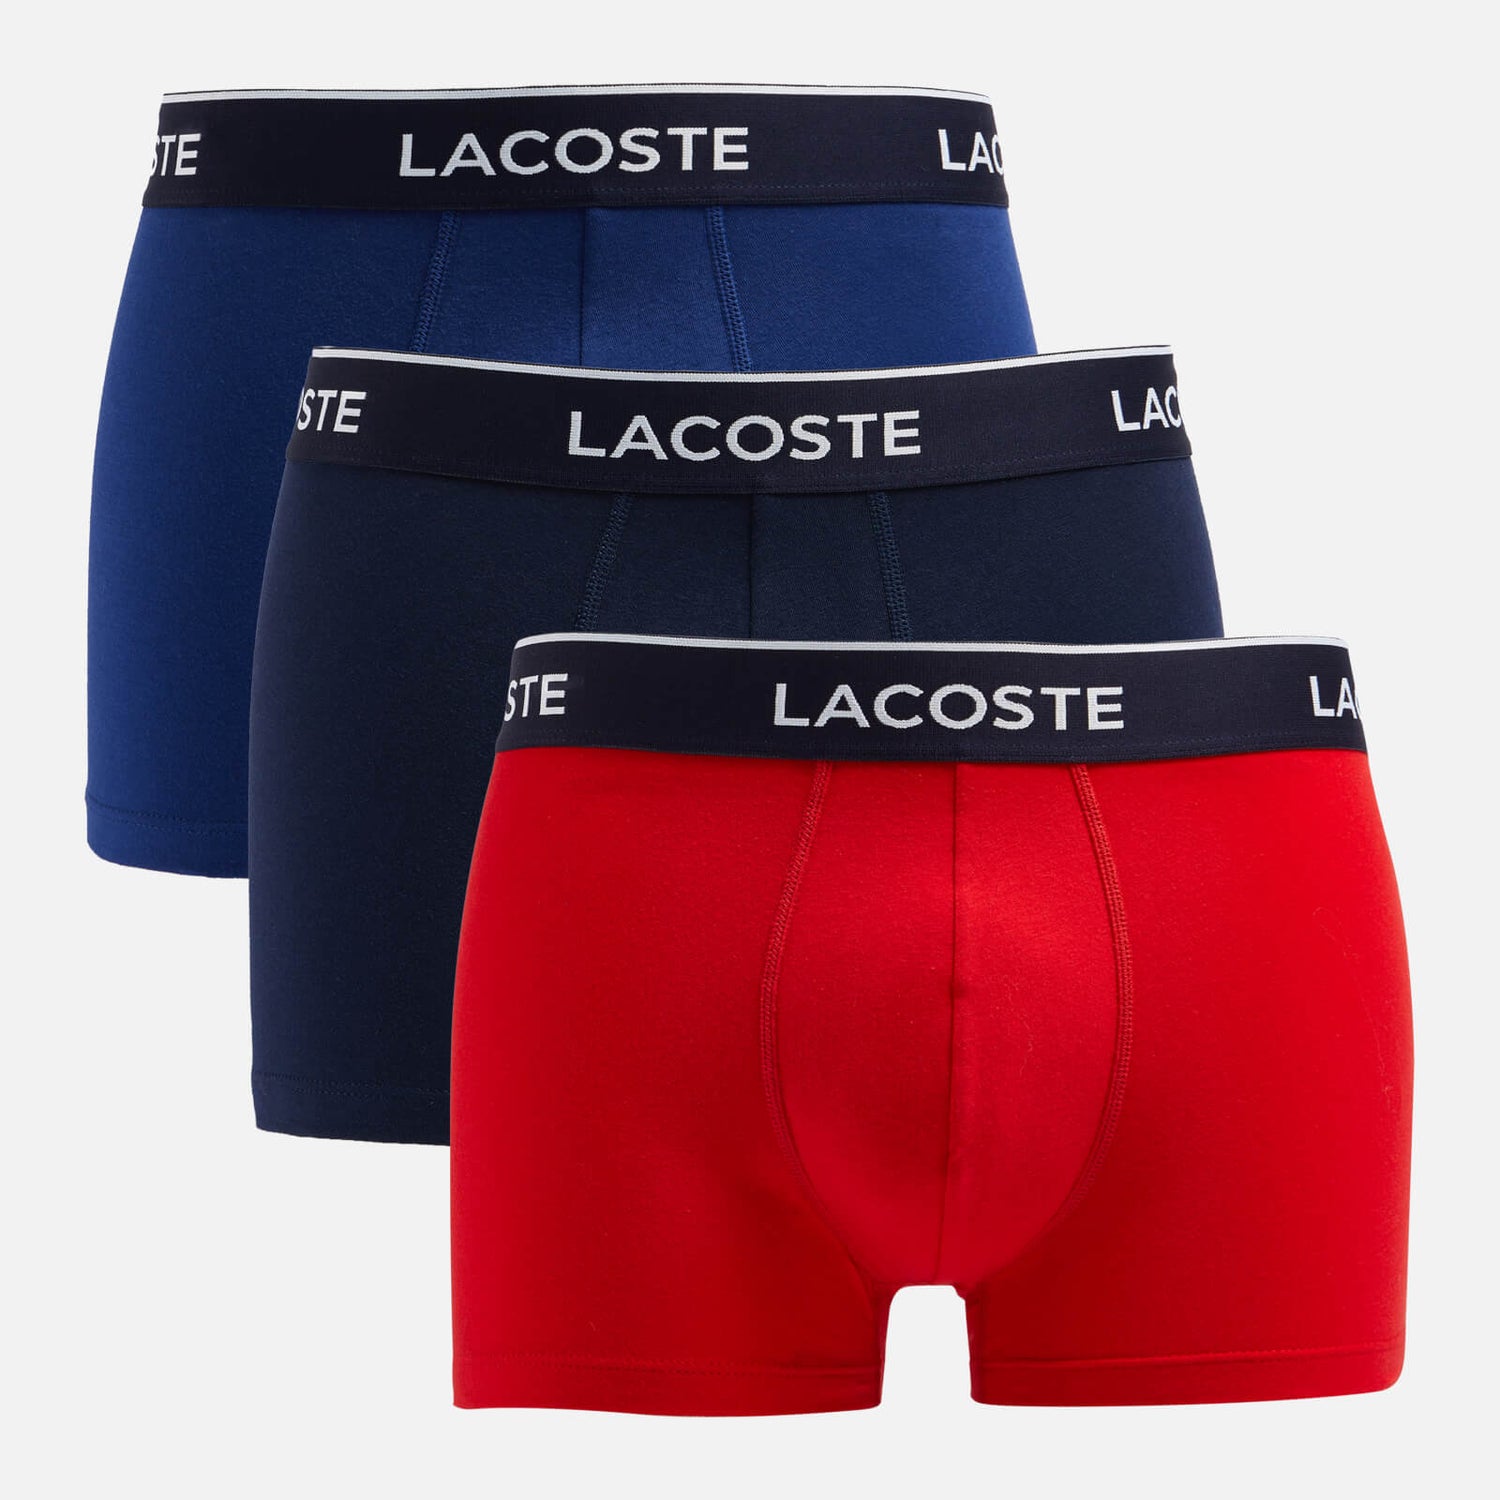 Lacoste Casual Three-Pack Blank Cotton-Blend Boxer Shorts